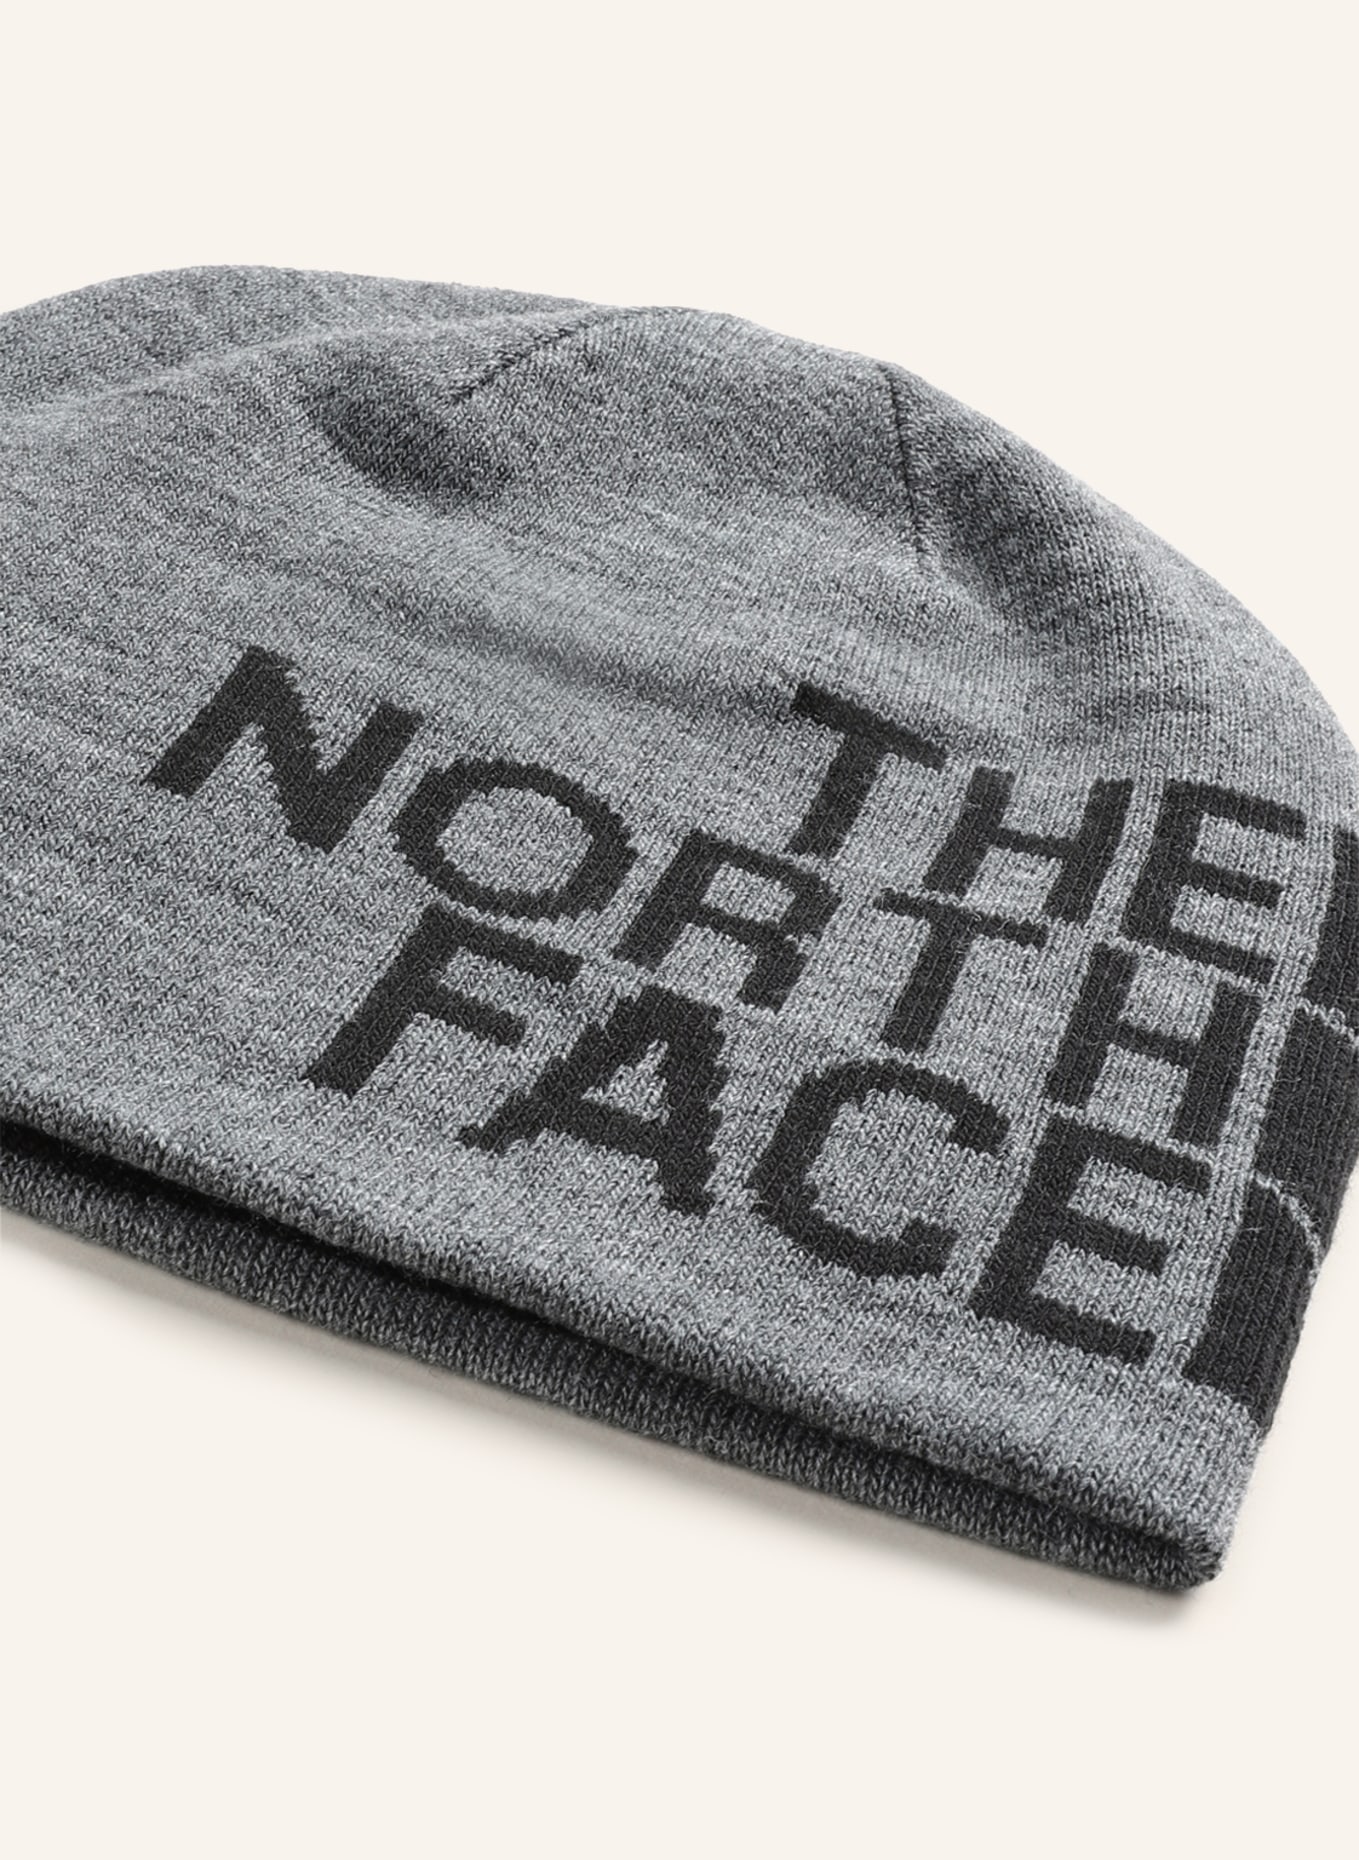 THE Beanie FACE gray BANNER reversible in NORTH TNF